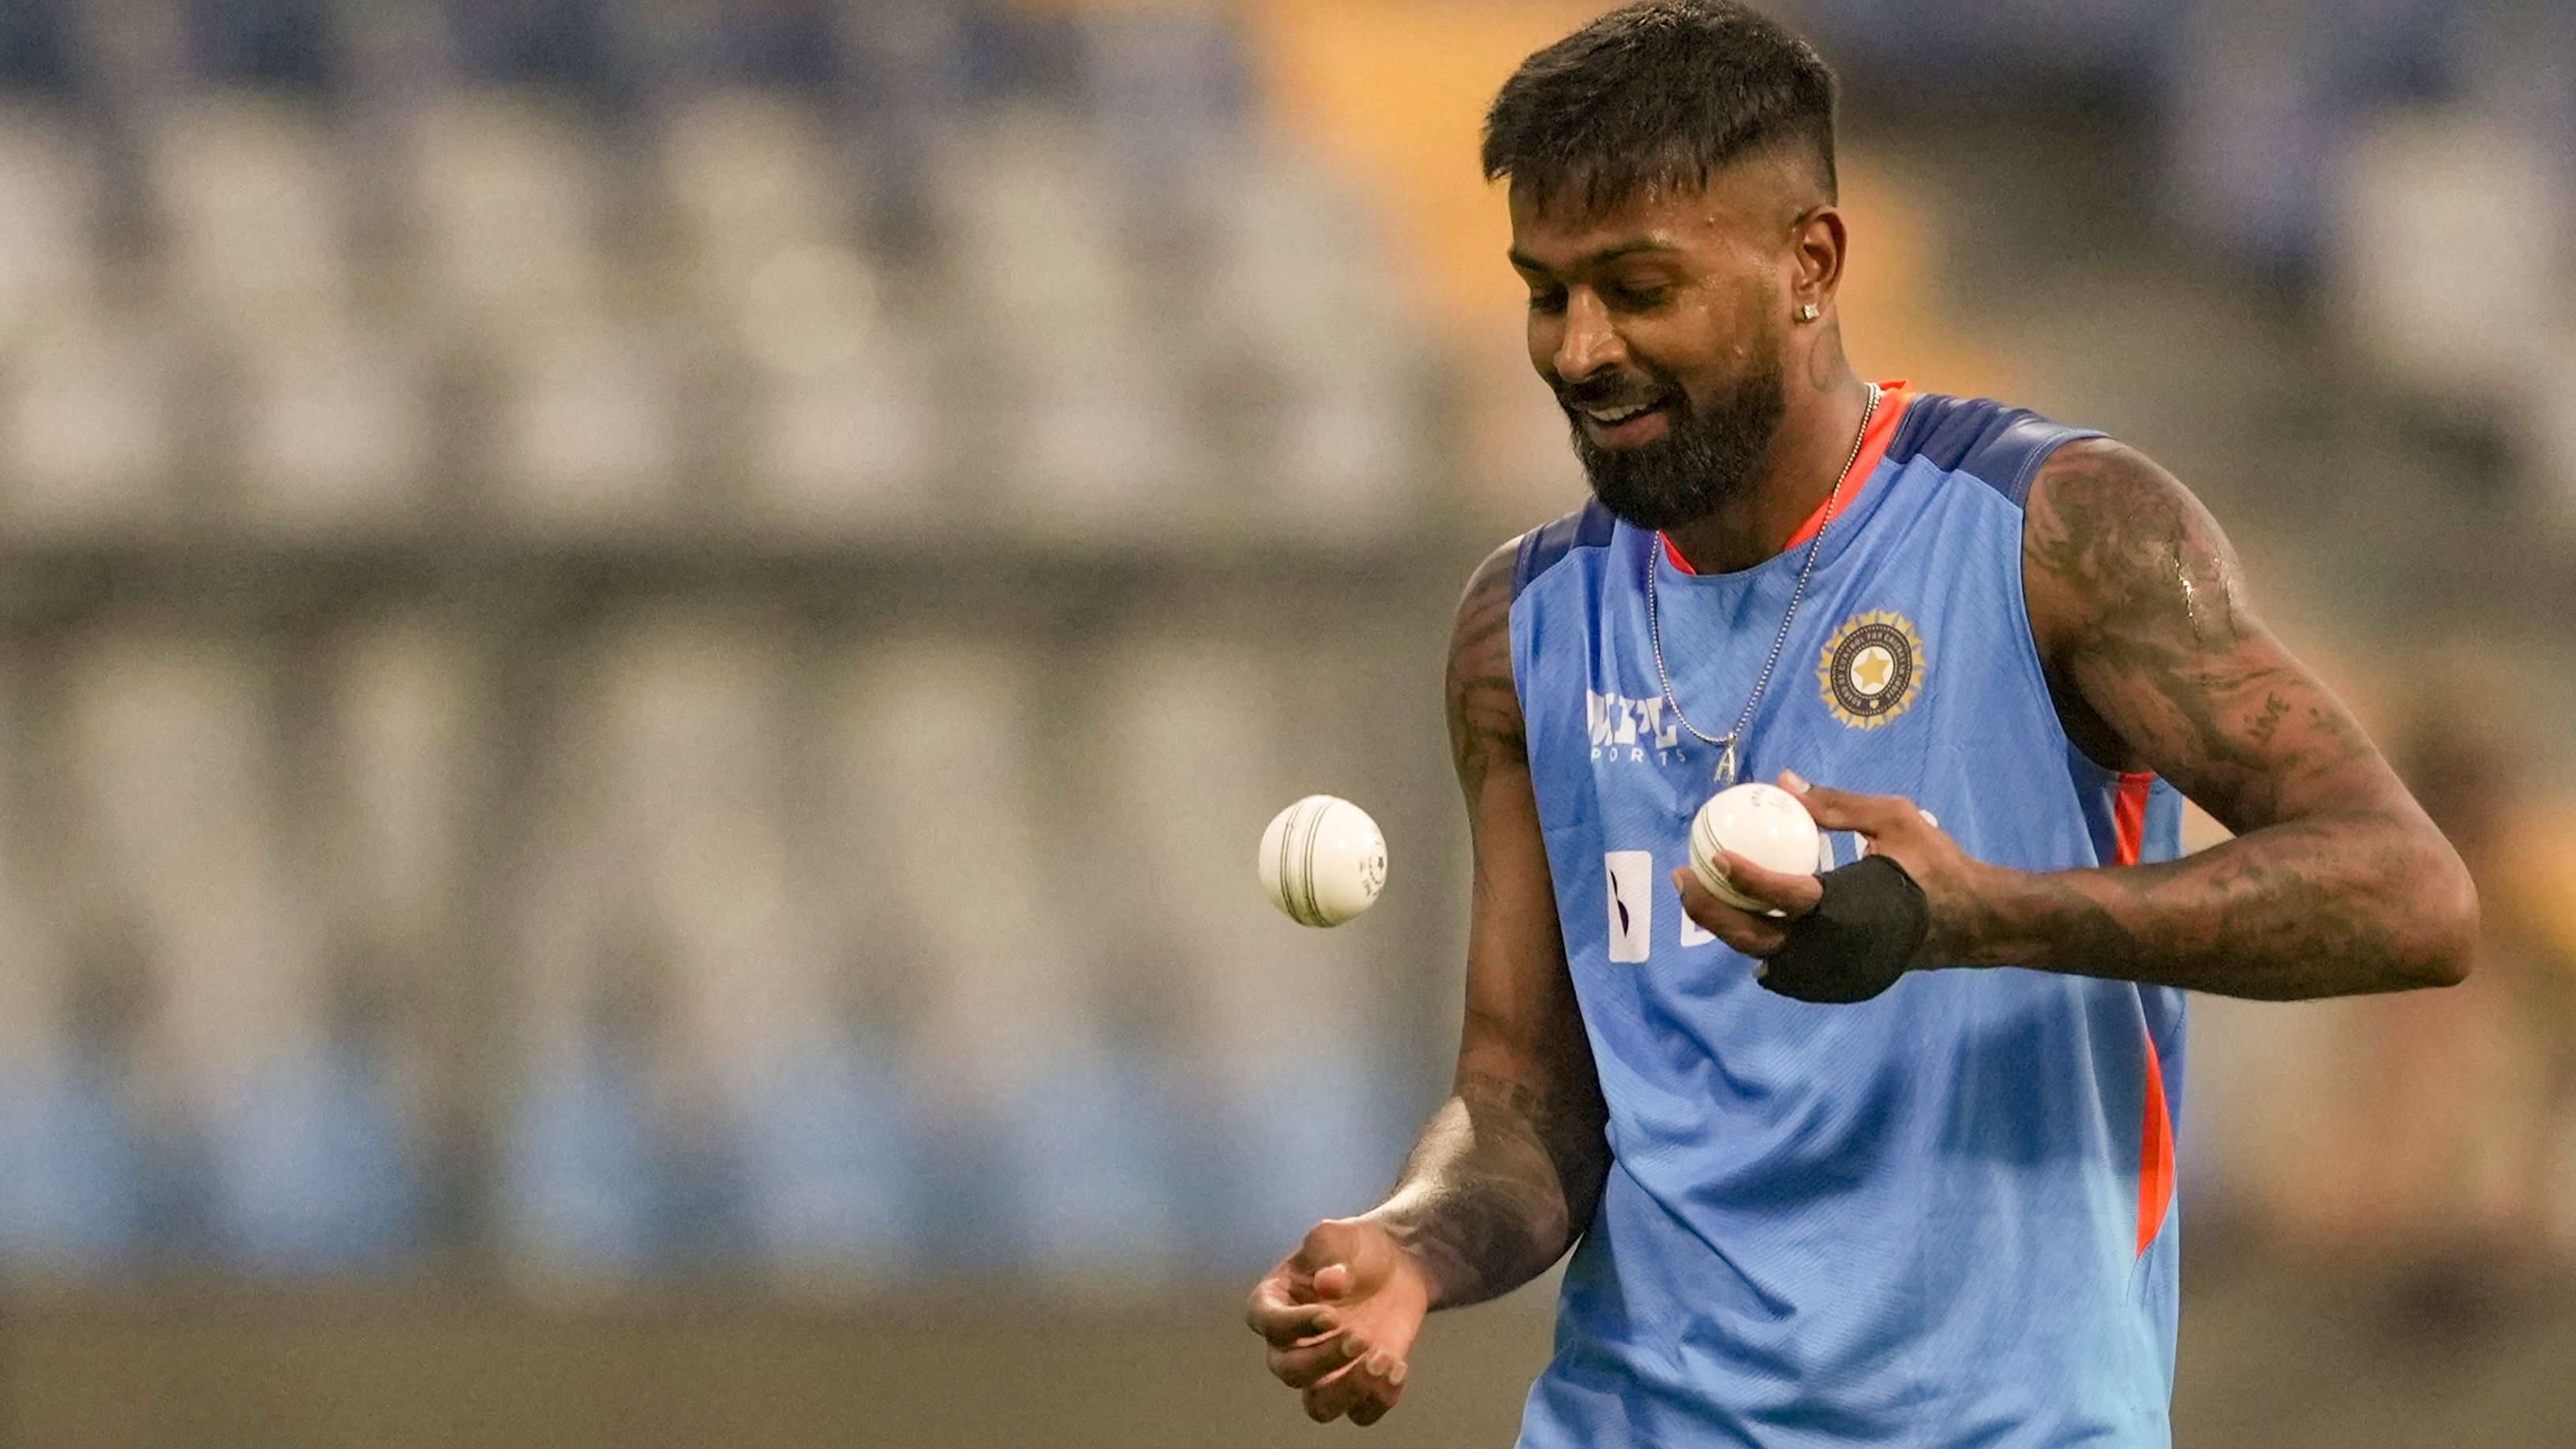 Pandya will captain India in the T20 series against Sri Lanka and will have to make do without Rohit Sharma and Virat Kohli. Credit: PTI Photo